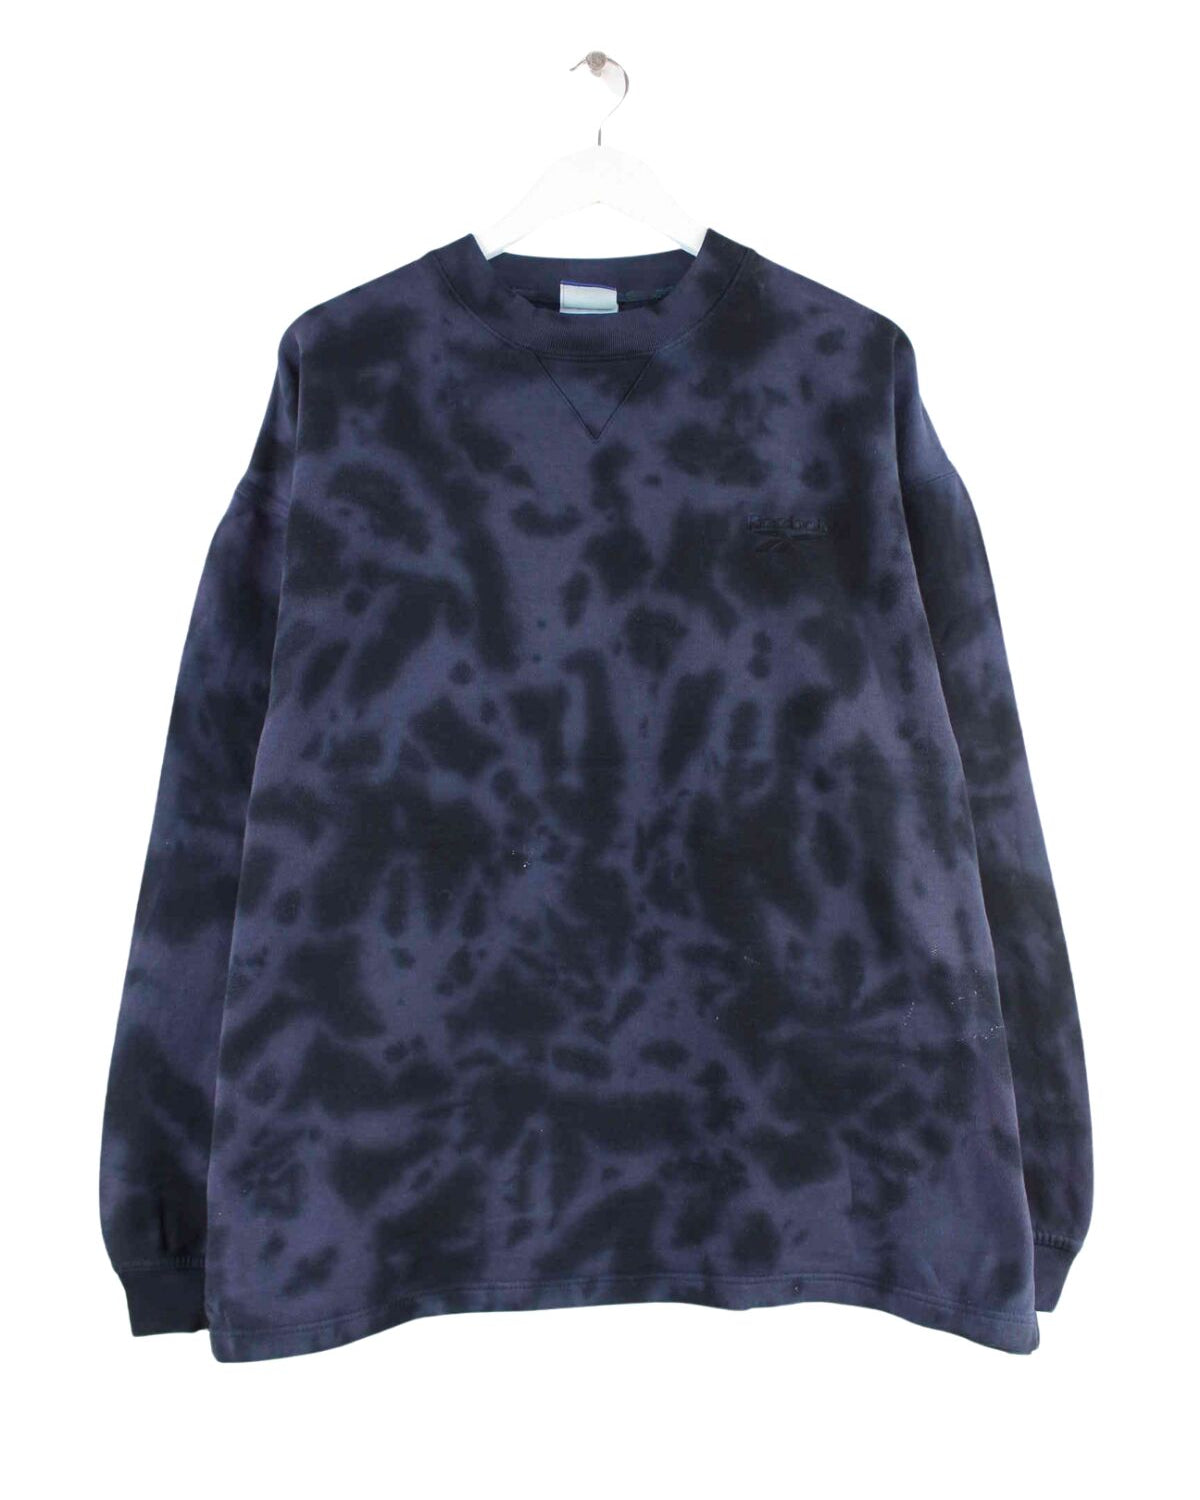 Reebok y2k Embroidered Tie Dye Sweater Lila XL (front image)